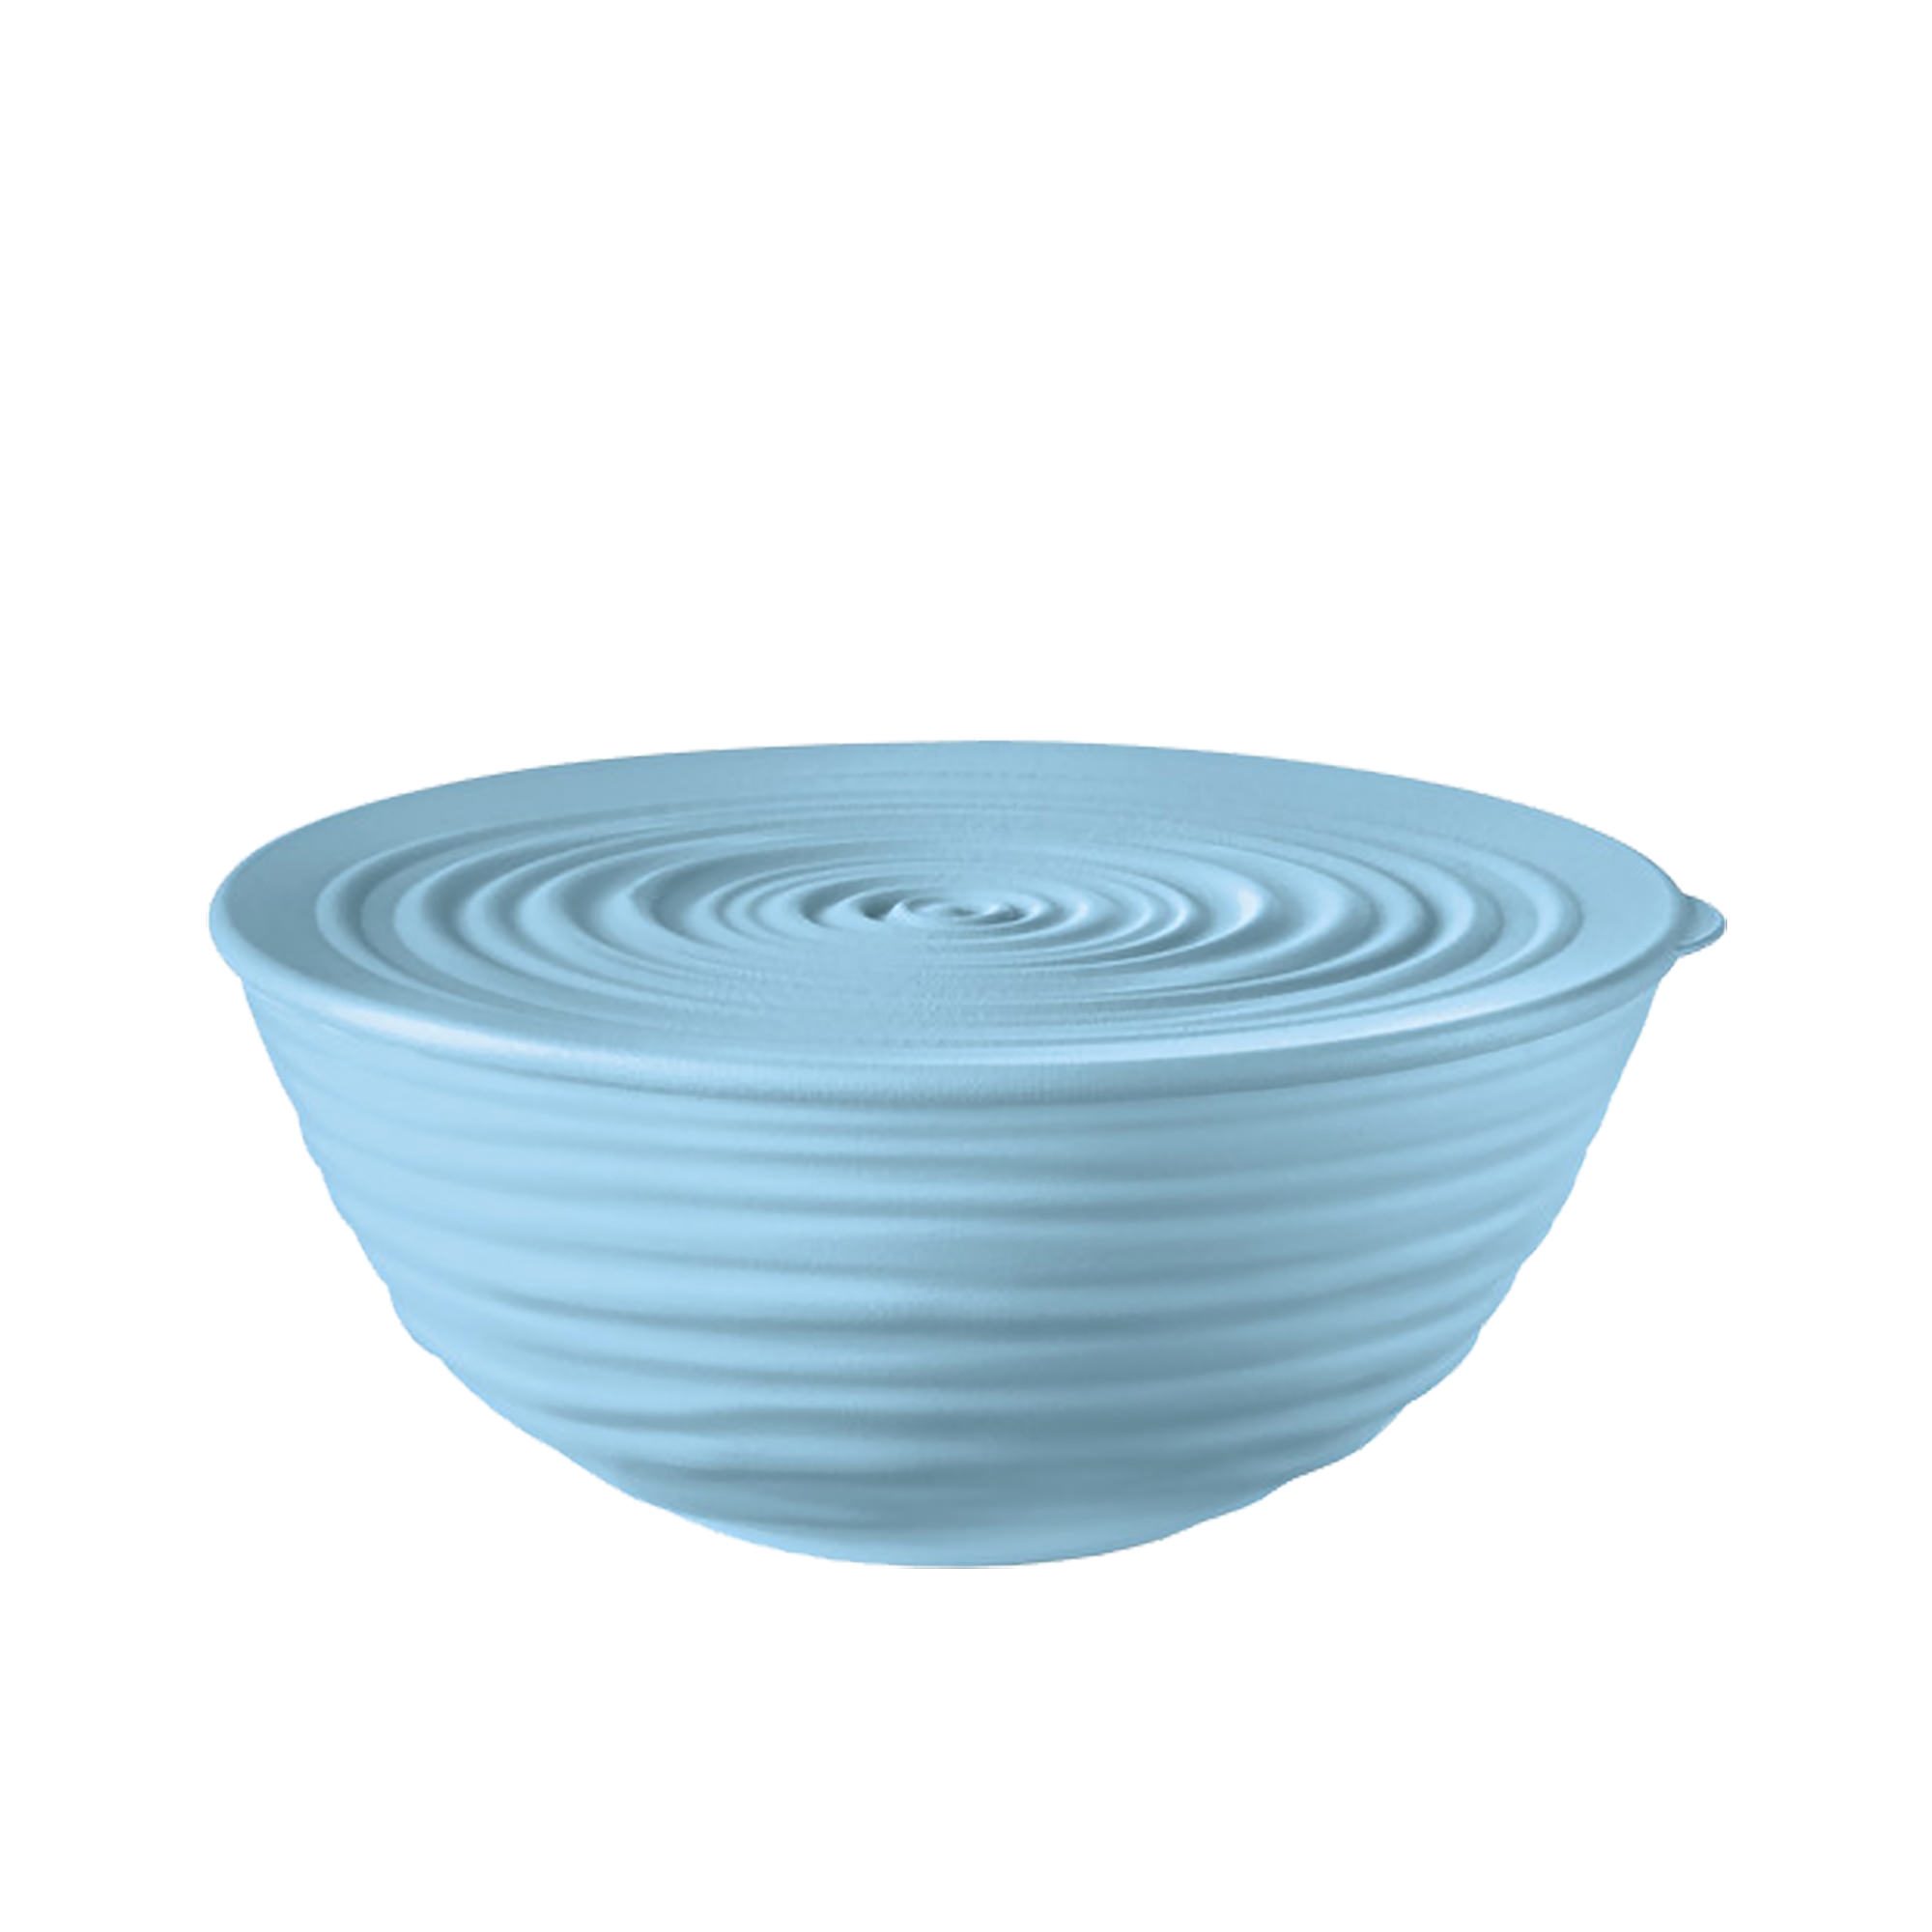 Guzzini Earth Tierra Bowl with Lid Large Powder Blue Image 1